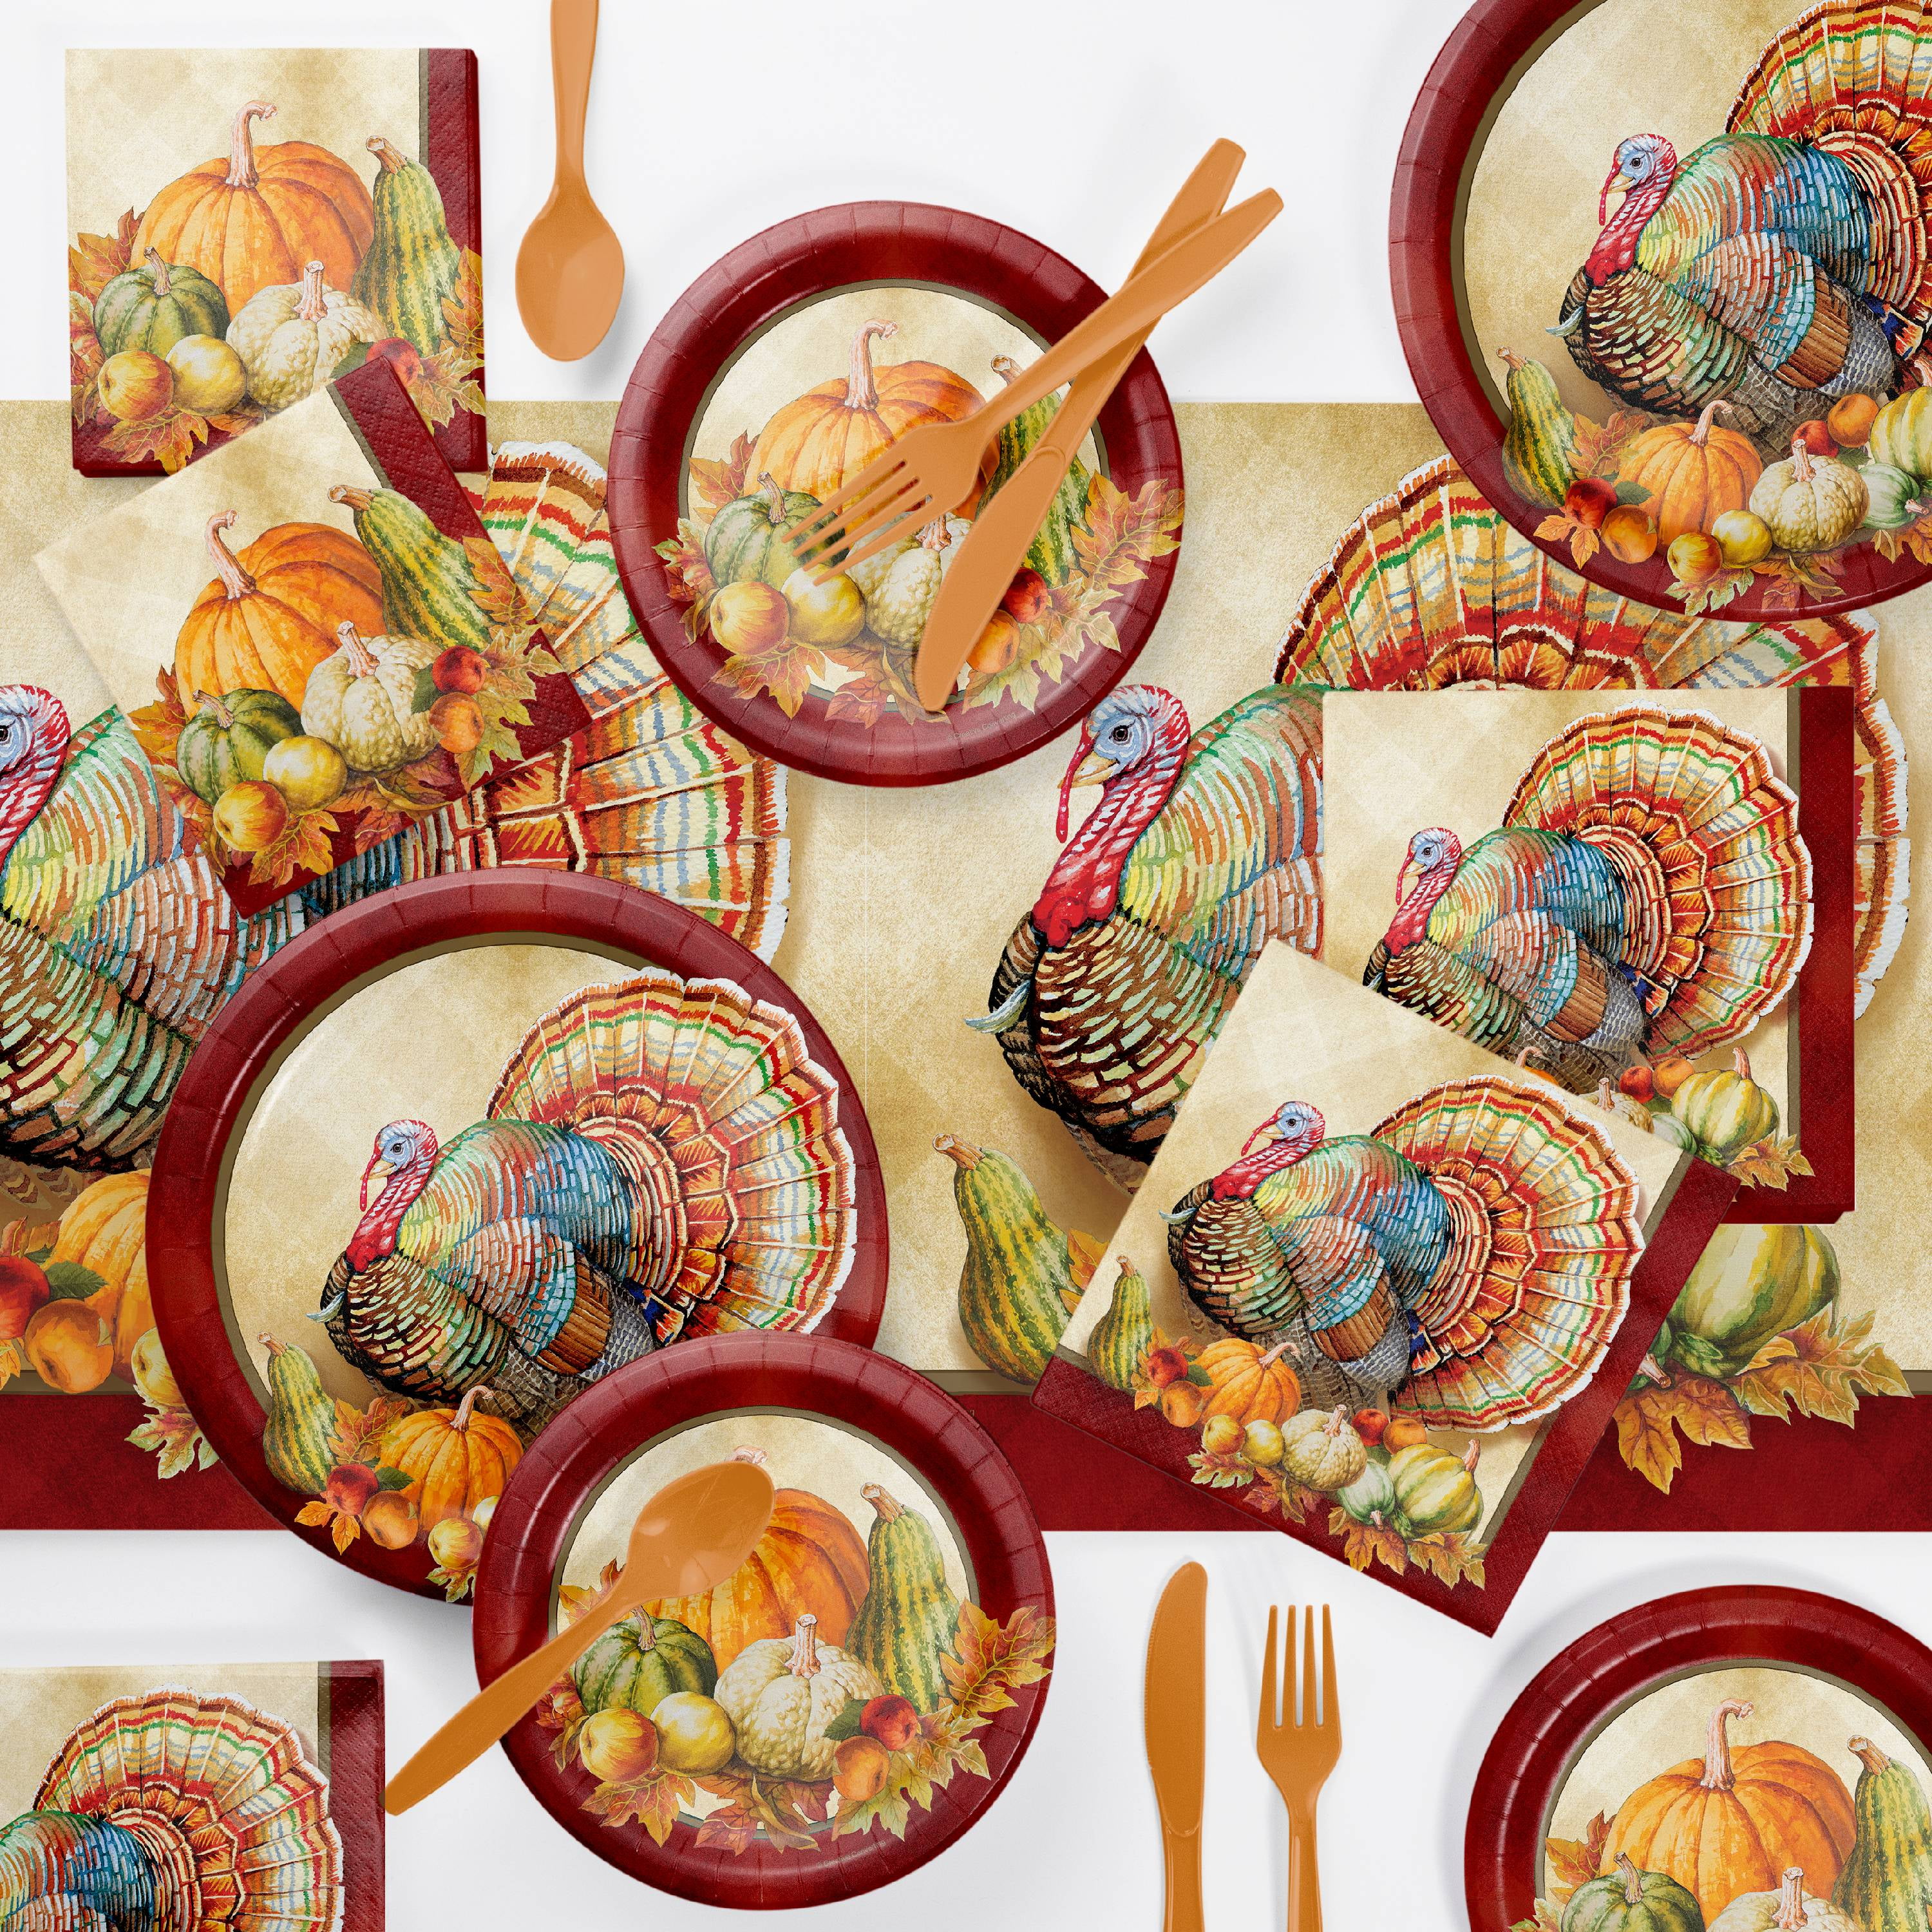 Large Traditions of Thanksgiving Party Supplies Kit (Serves 16 Guests